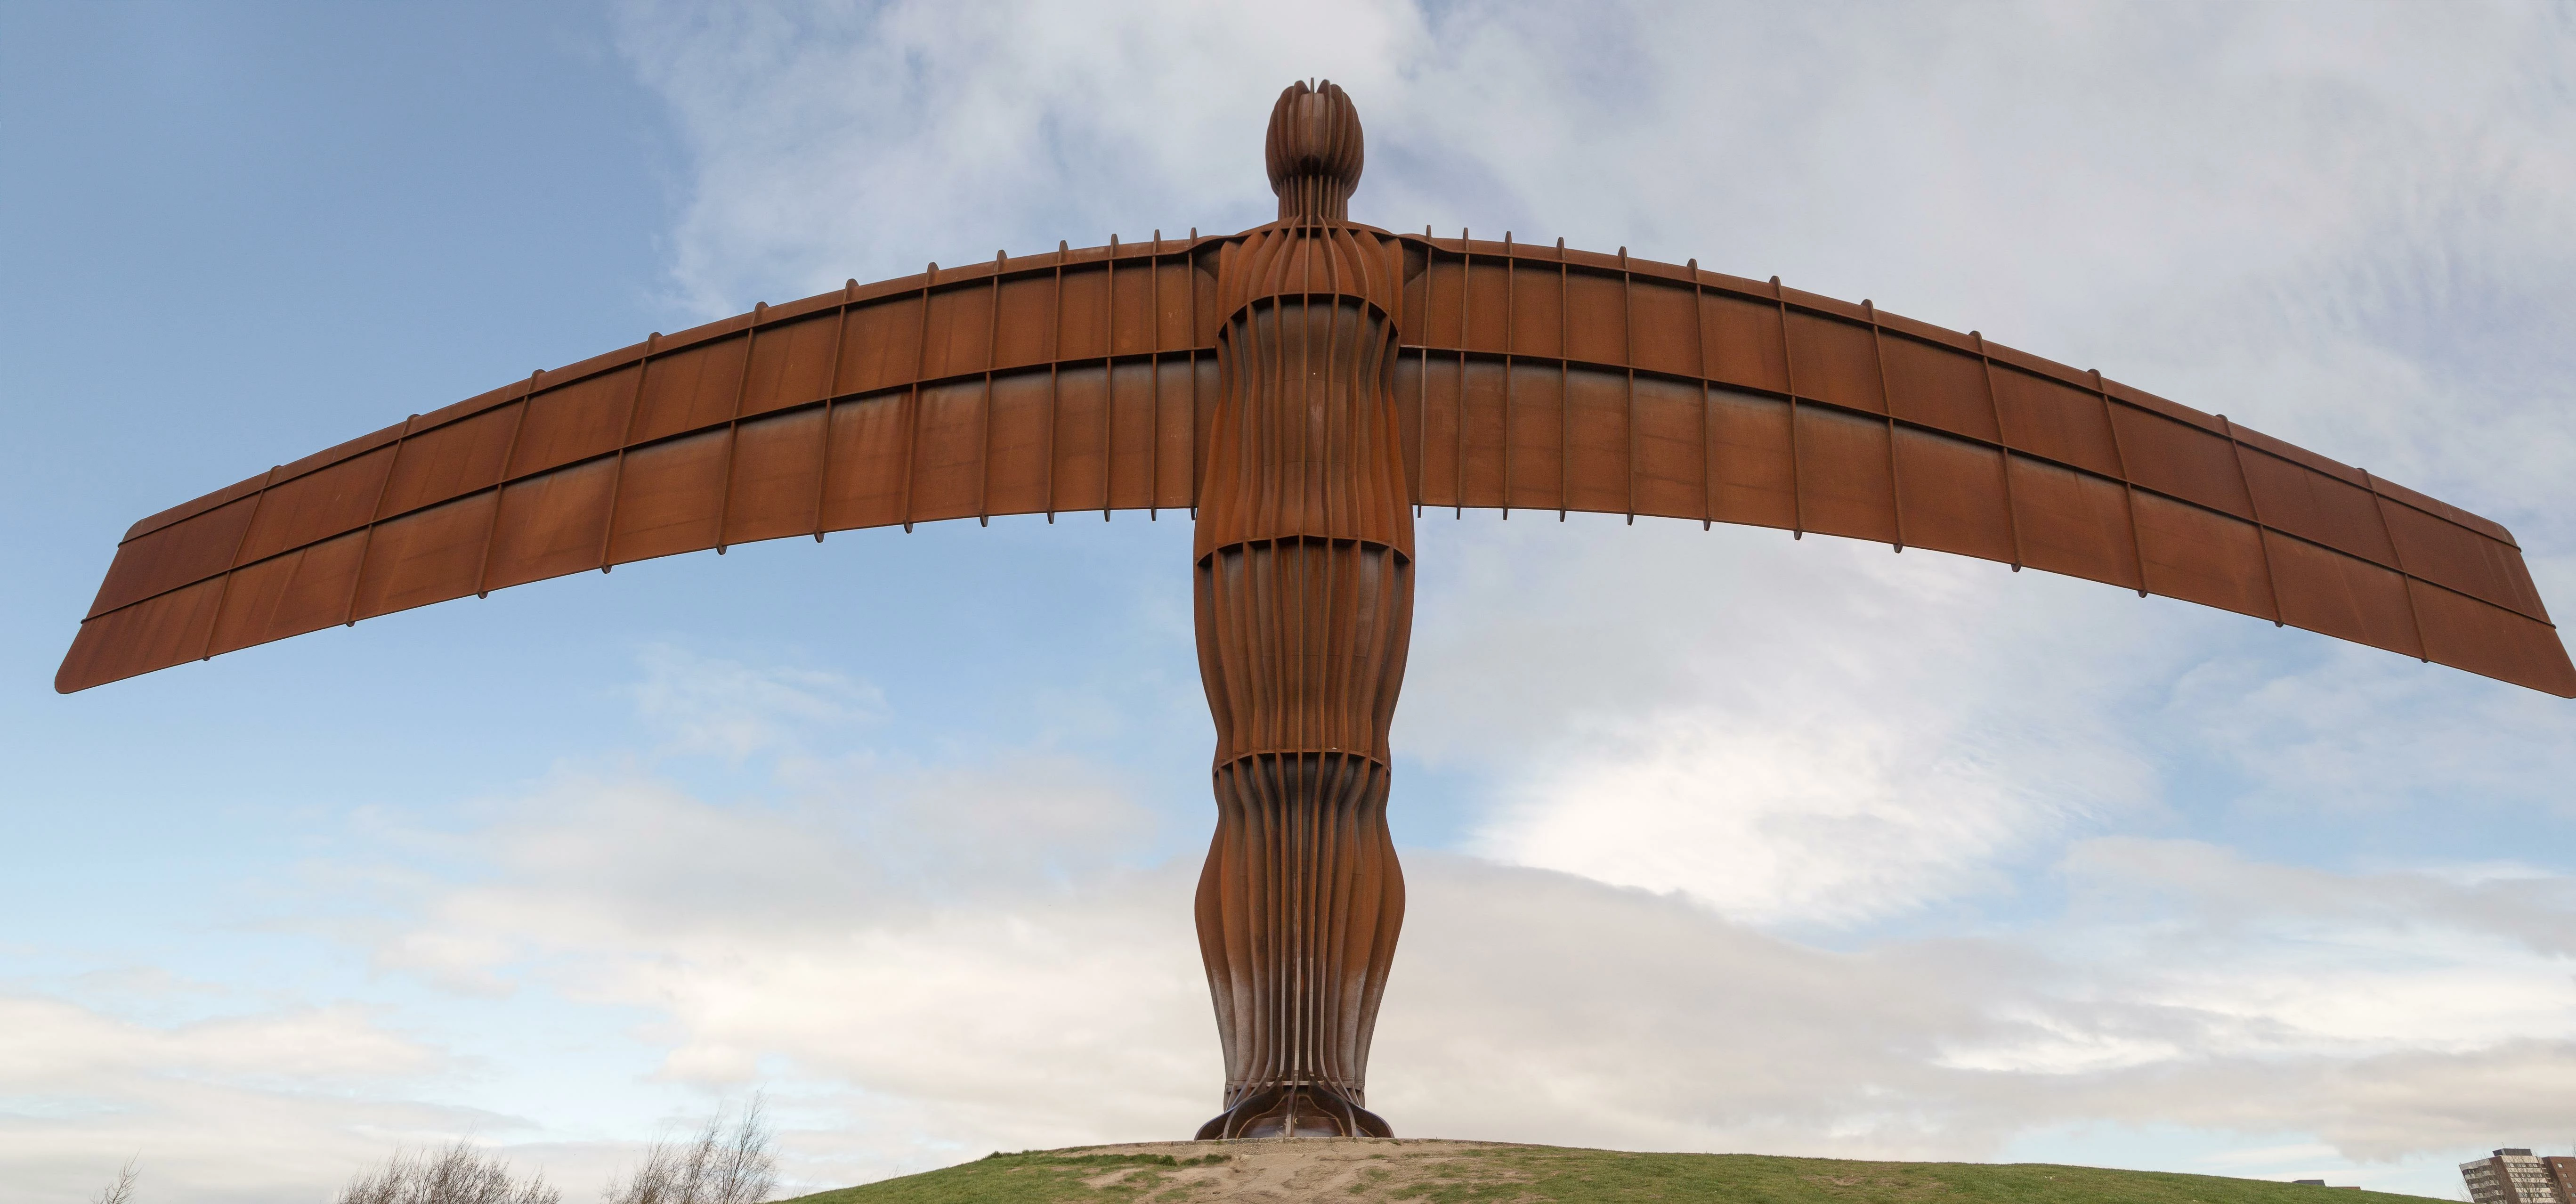 Angel of the North [2]